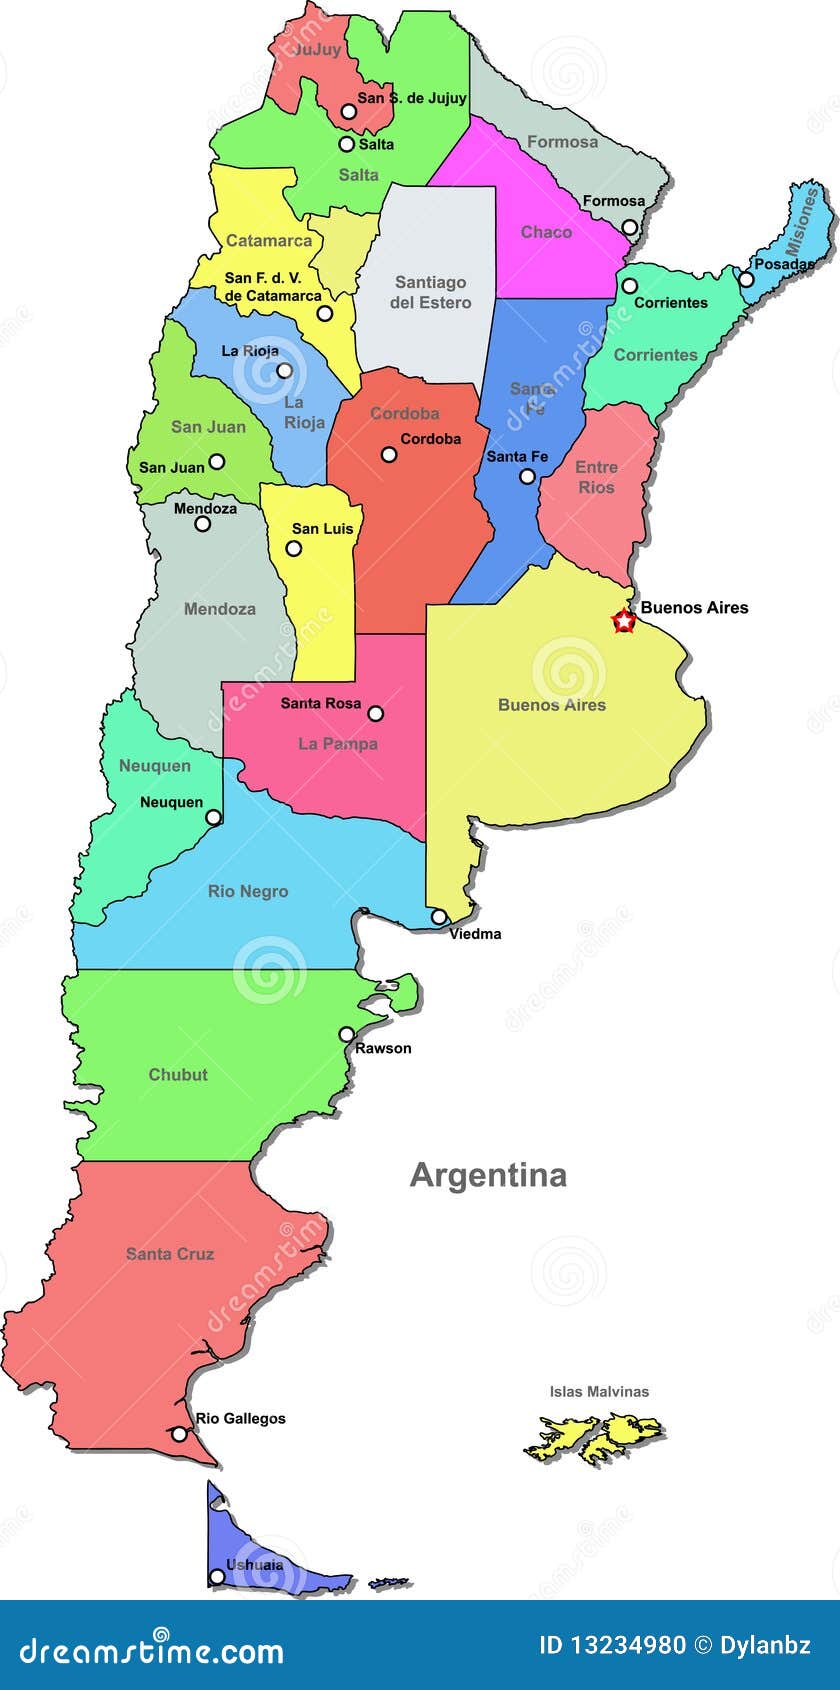 Argentina map stock vector. Illustration of argentina - 13234980